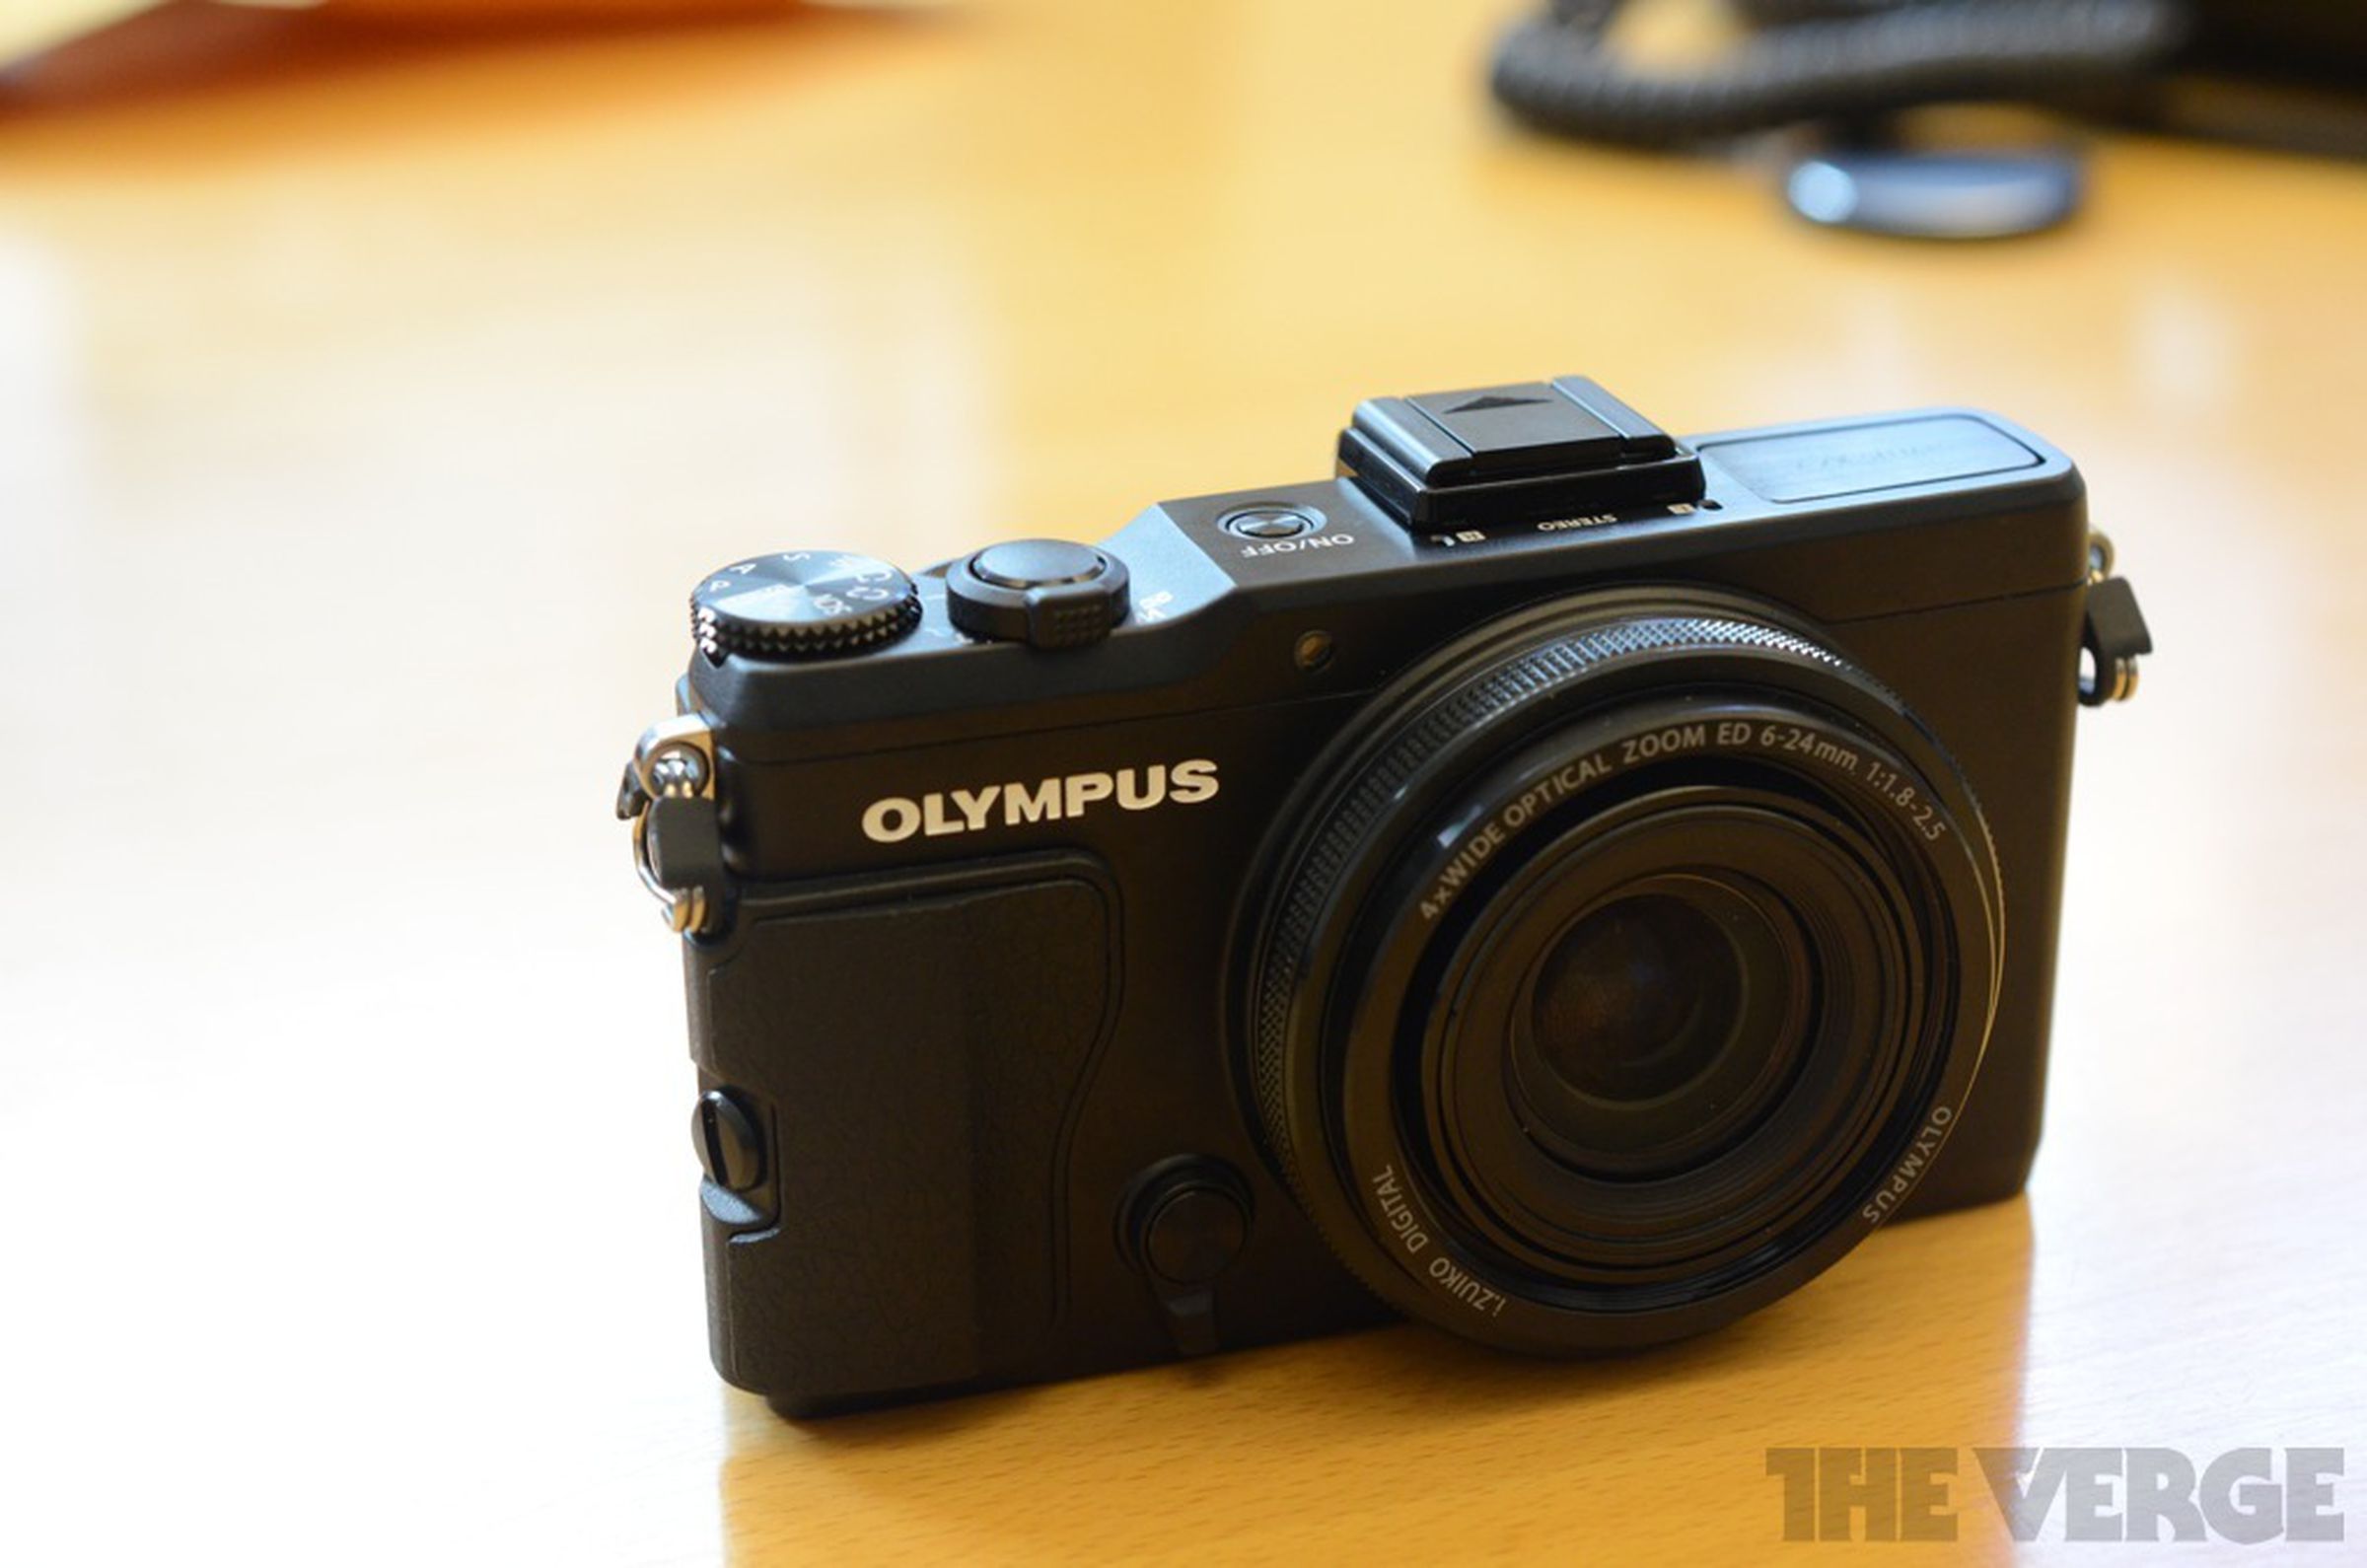 Olympus E-PL5, E-PM2, and XZ-2 pictures